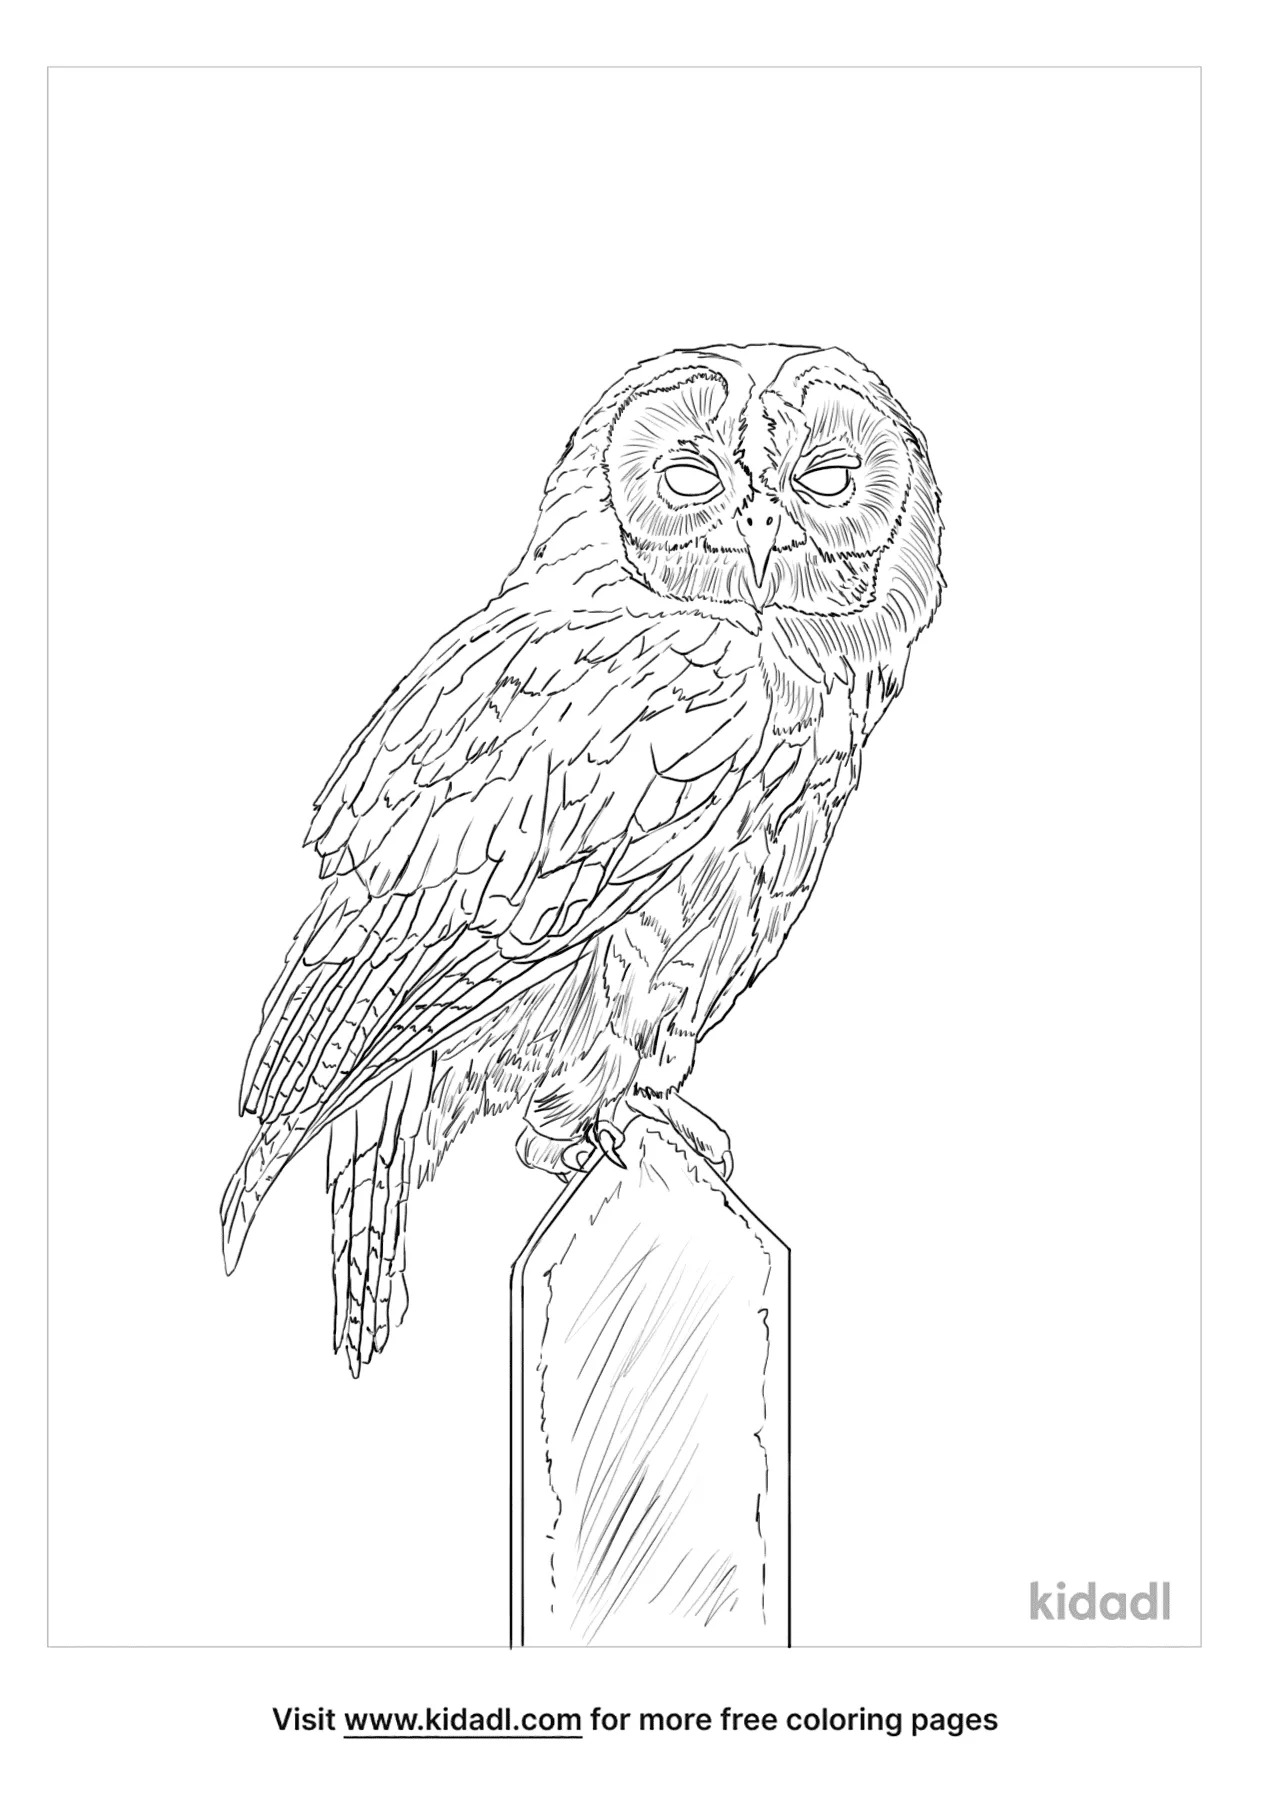 Tawny Owl Coloring Page